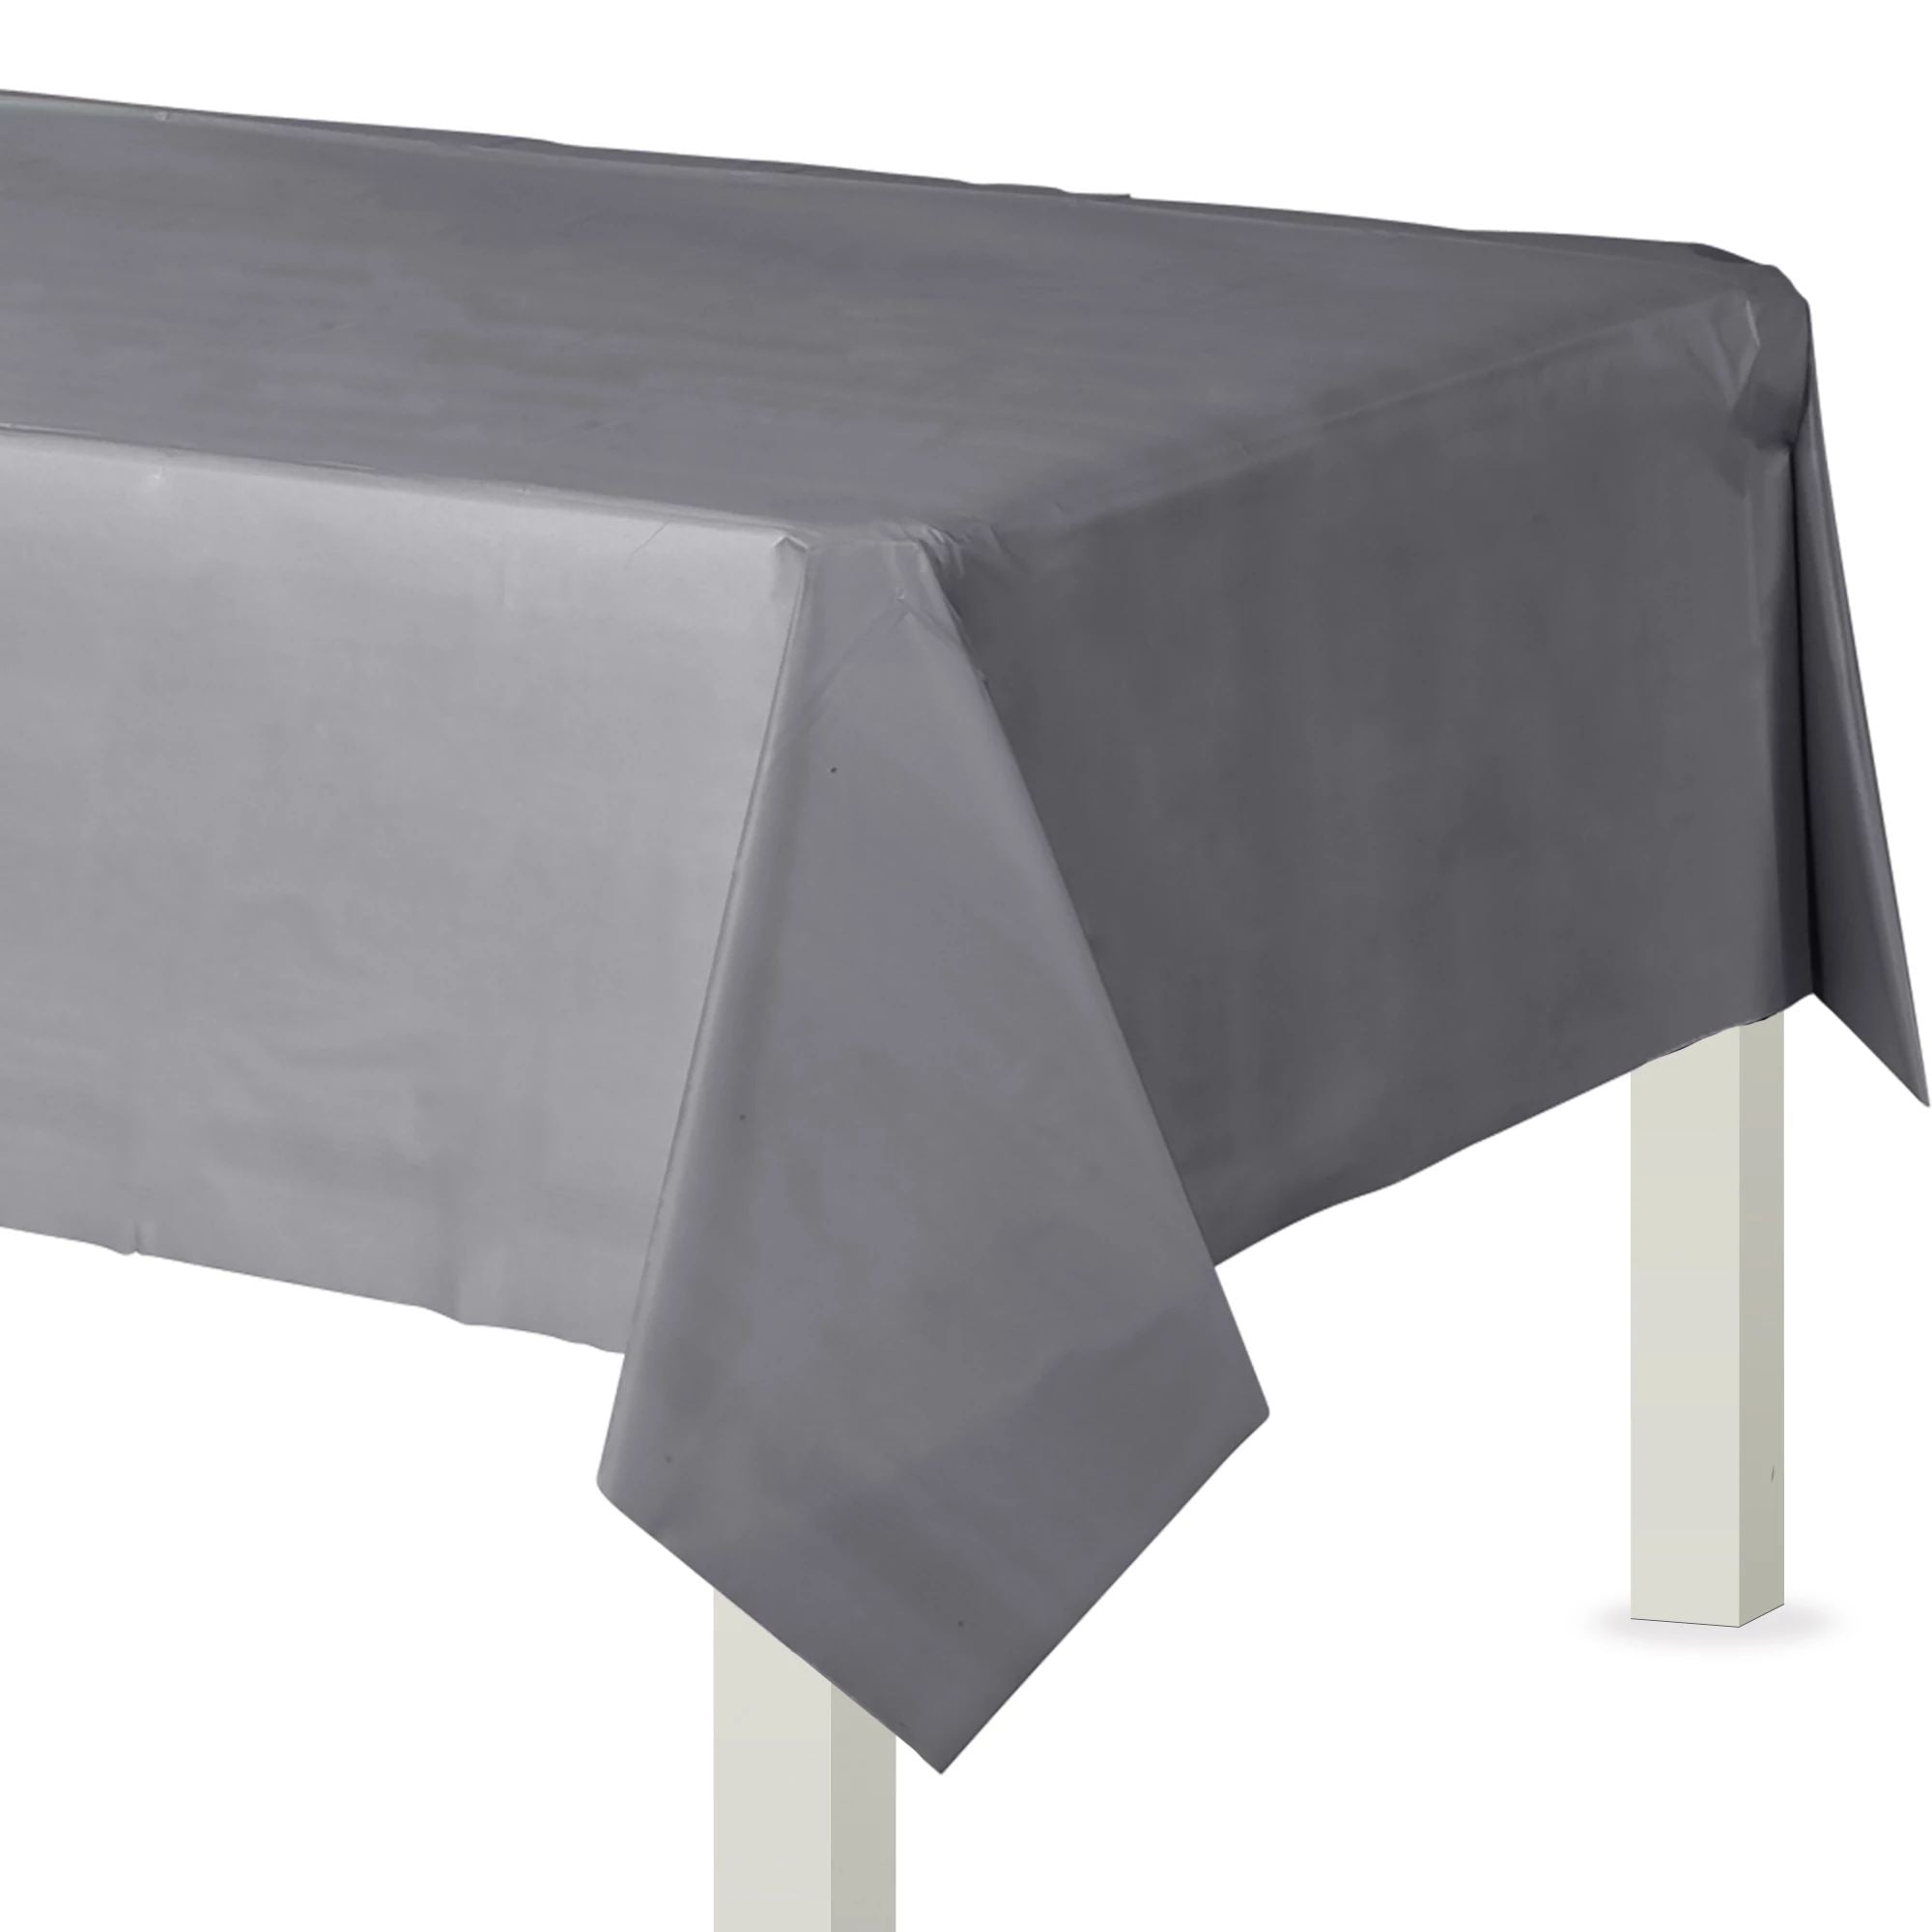 54" x 108" Flannel Backed Table Cover - Silver